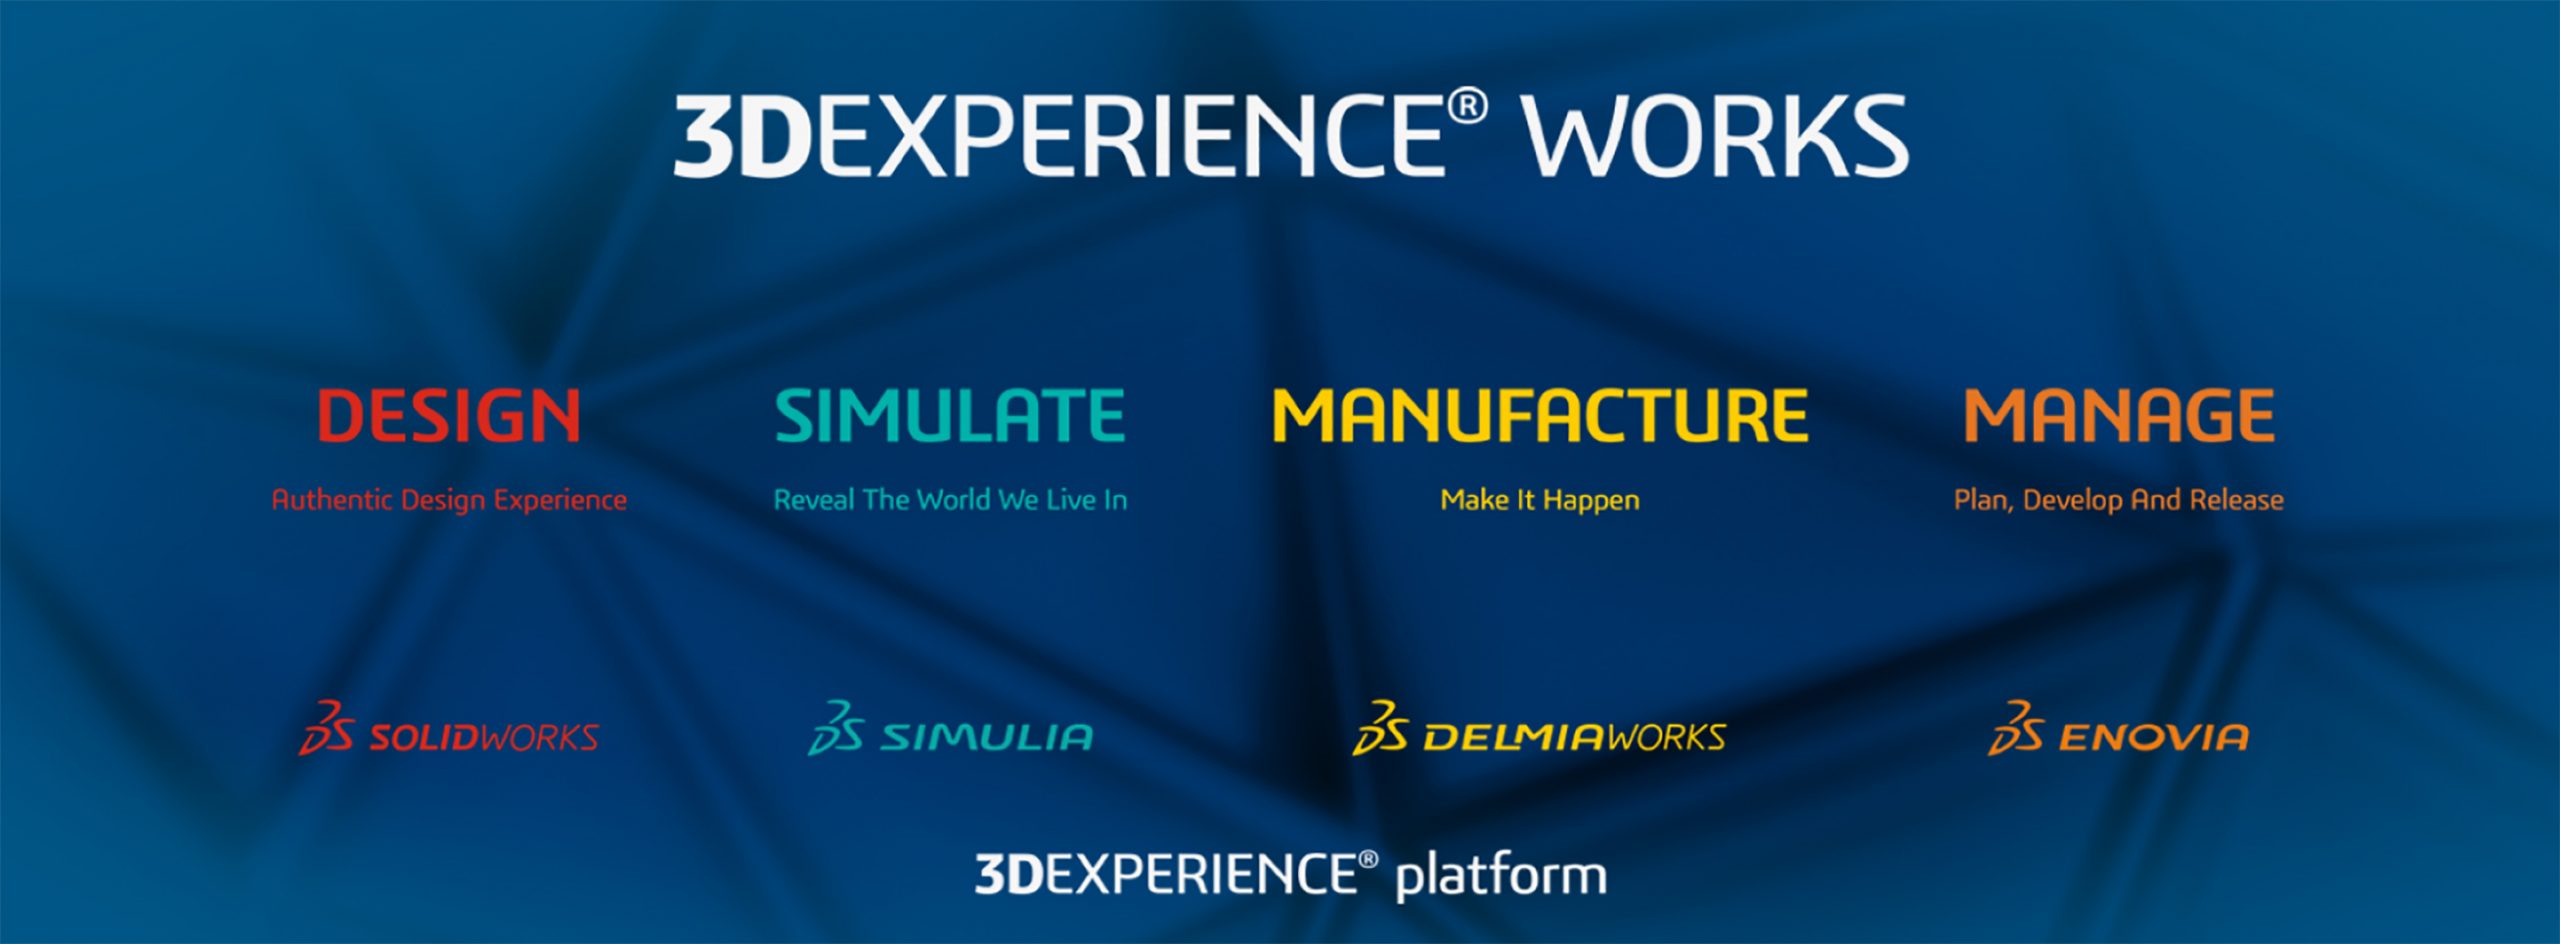 3DEXPERIENCE Works Overview